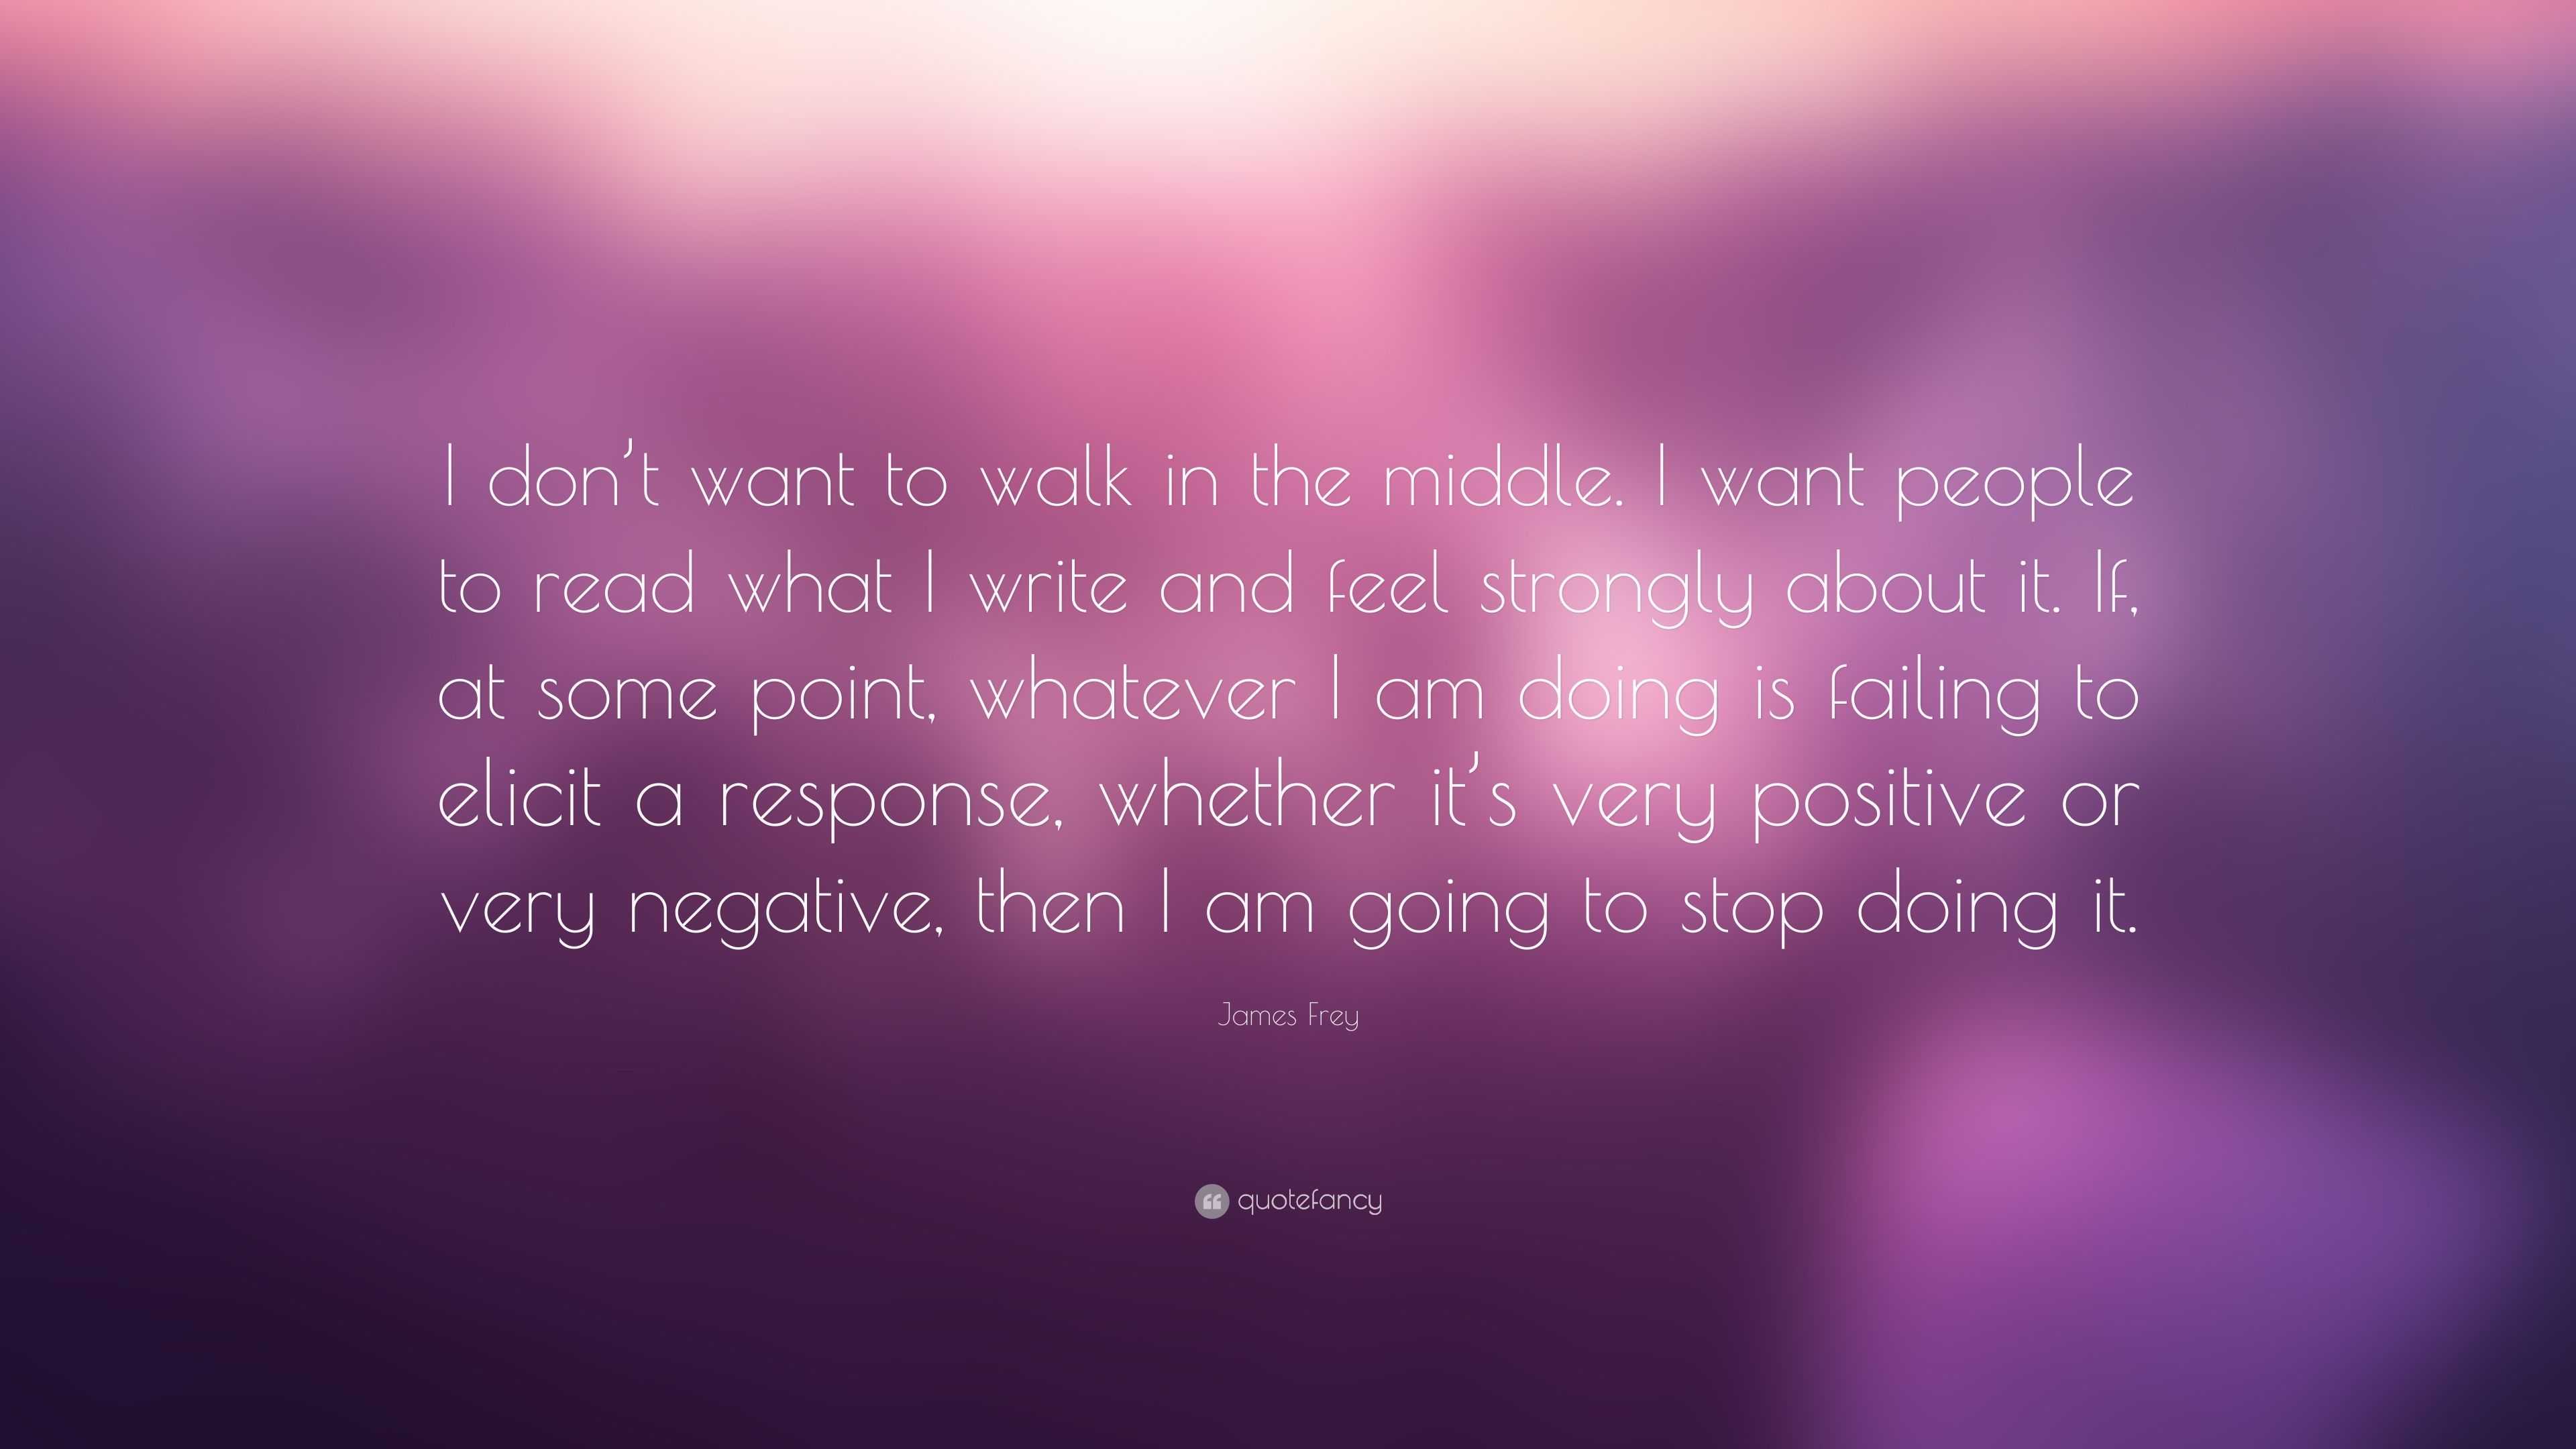 James Frey Quote: “I don’t want to walk in the middle. I want people to ...